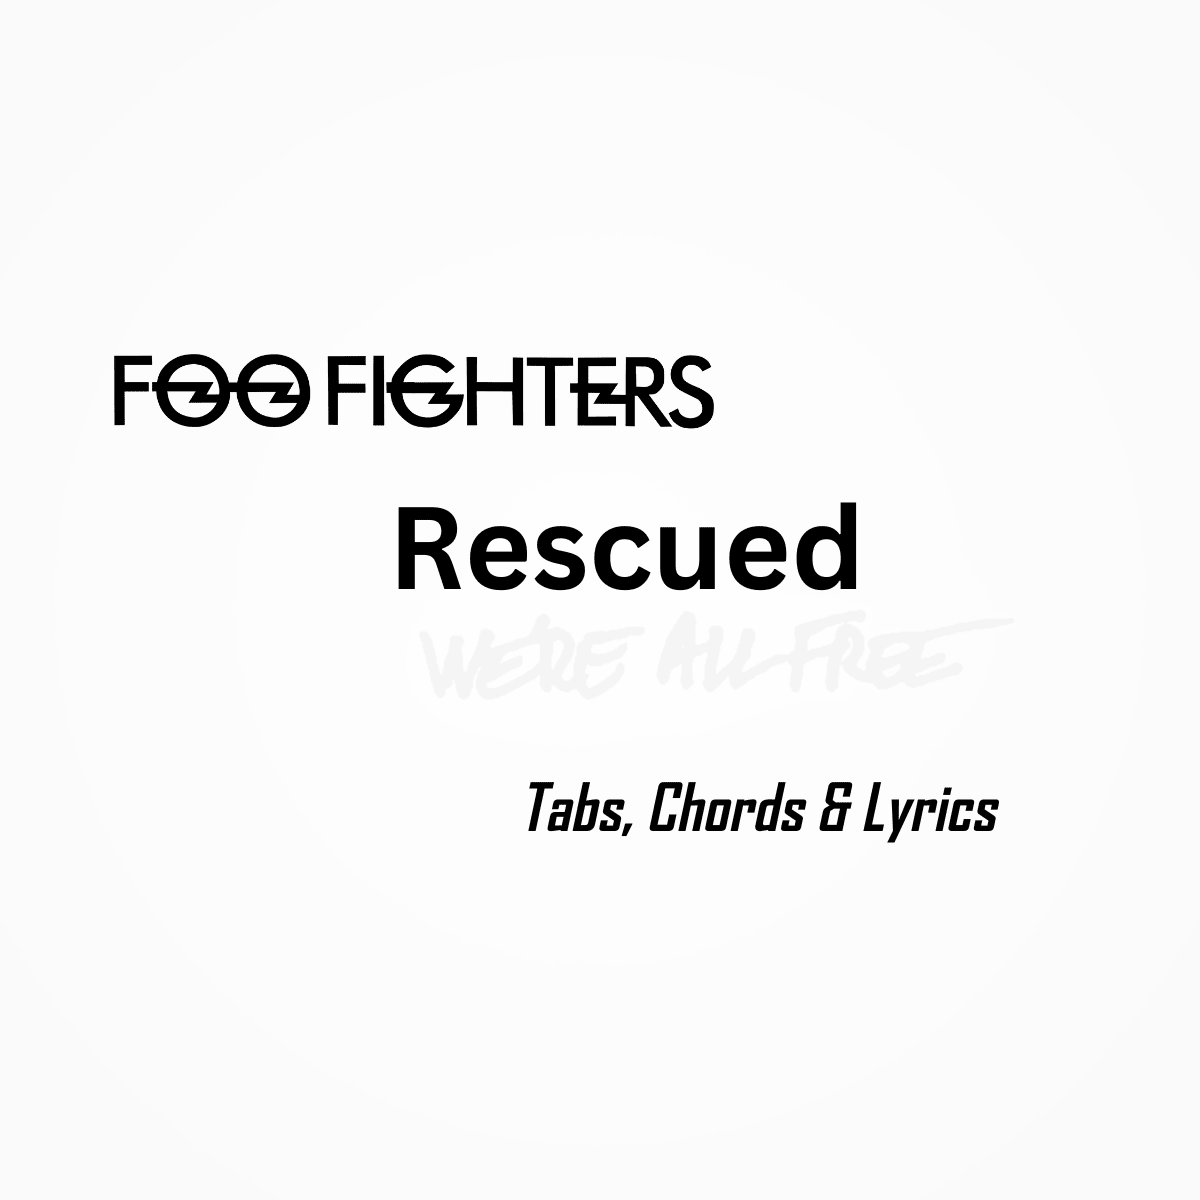 Foo fighter Rescued Chords, tabs